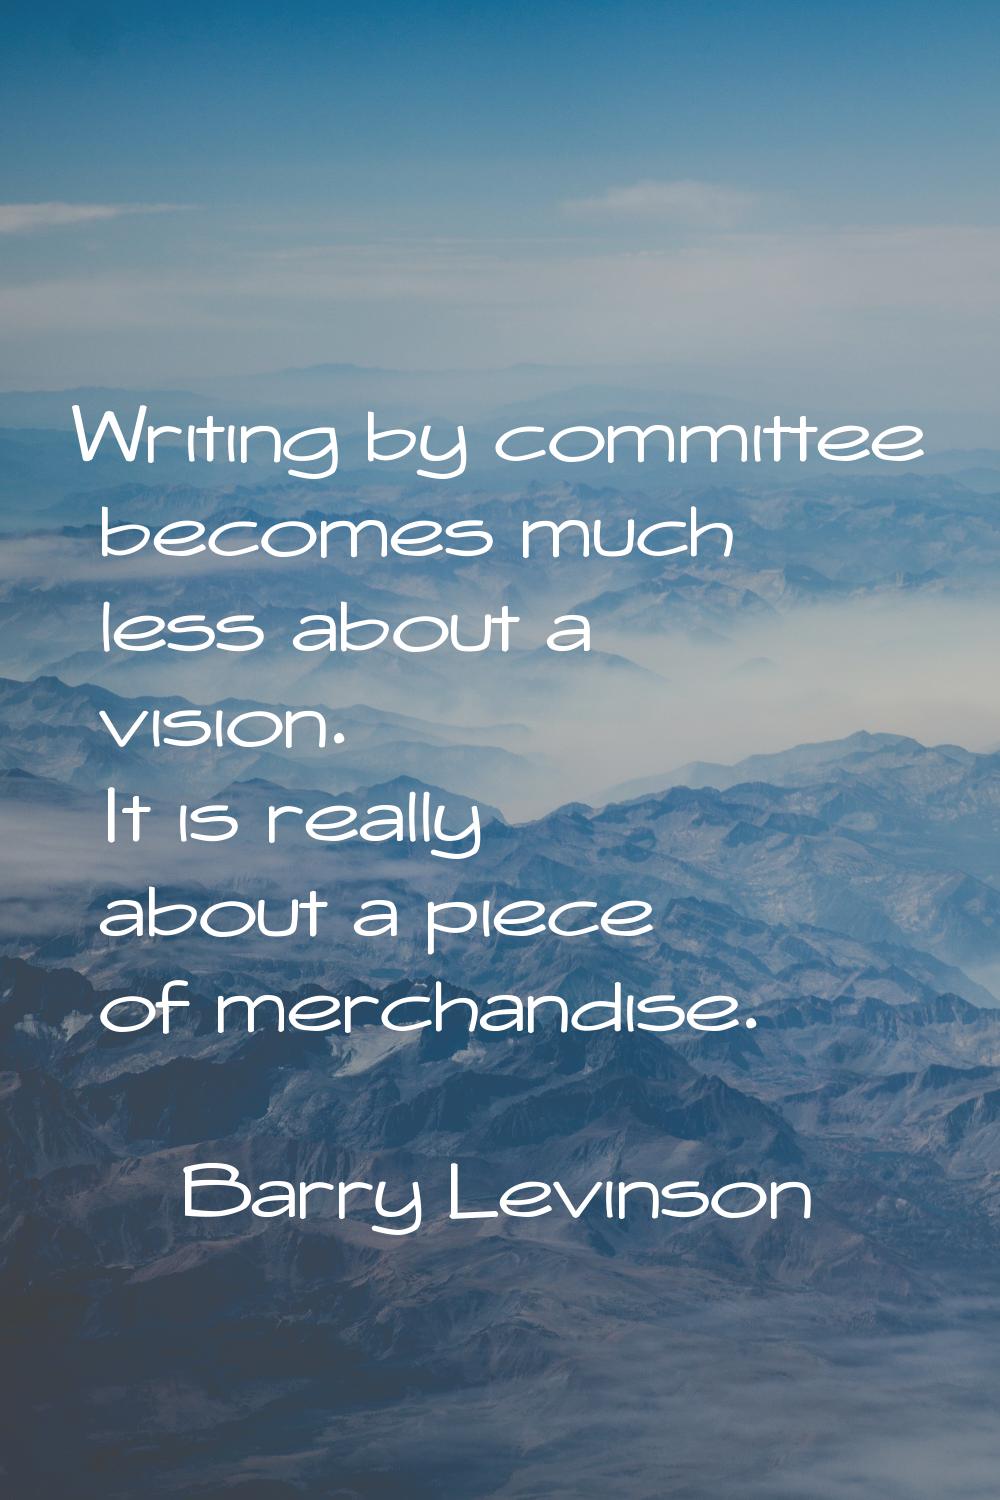 Writing by committee becomes much less about a vision. It is really about a piece of merchandise.